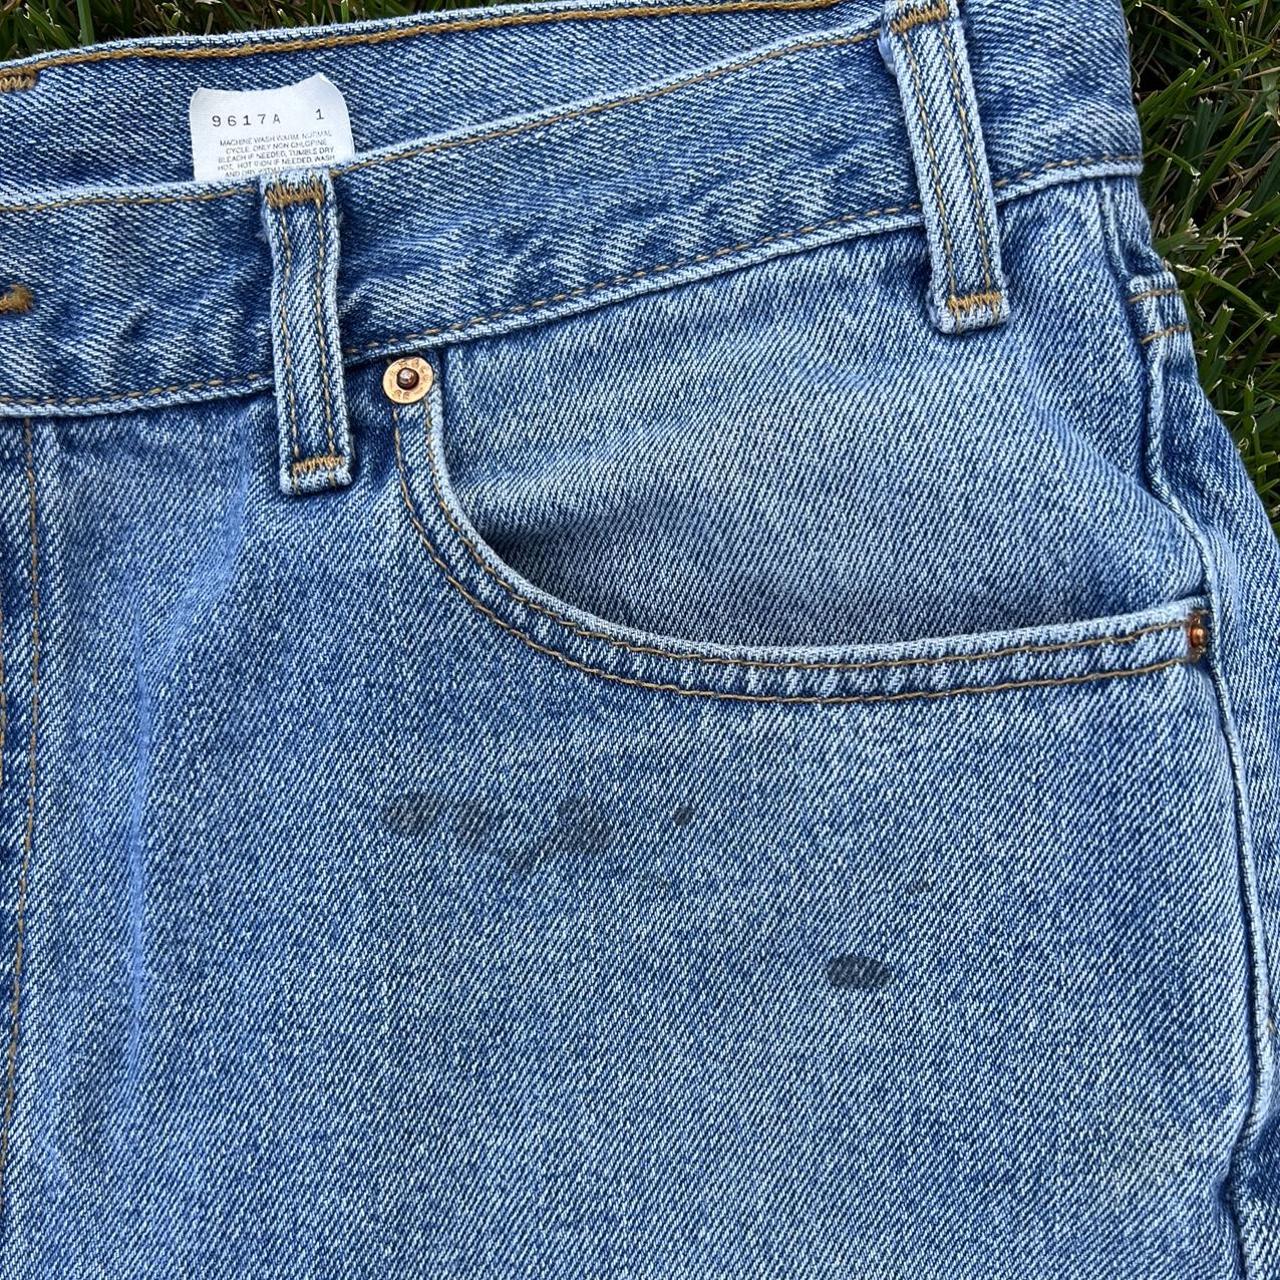 Super cool clean levi jorts 🧼ALL CLOTHING ARE... - Depop